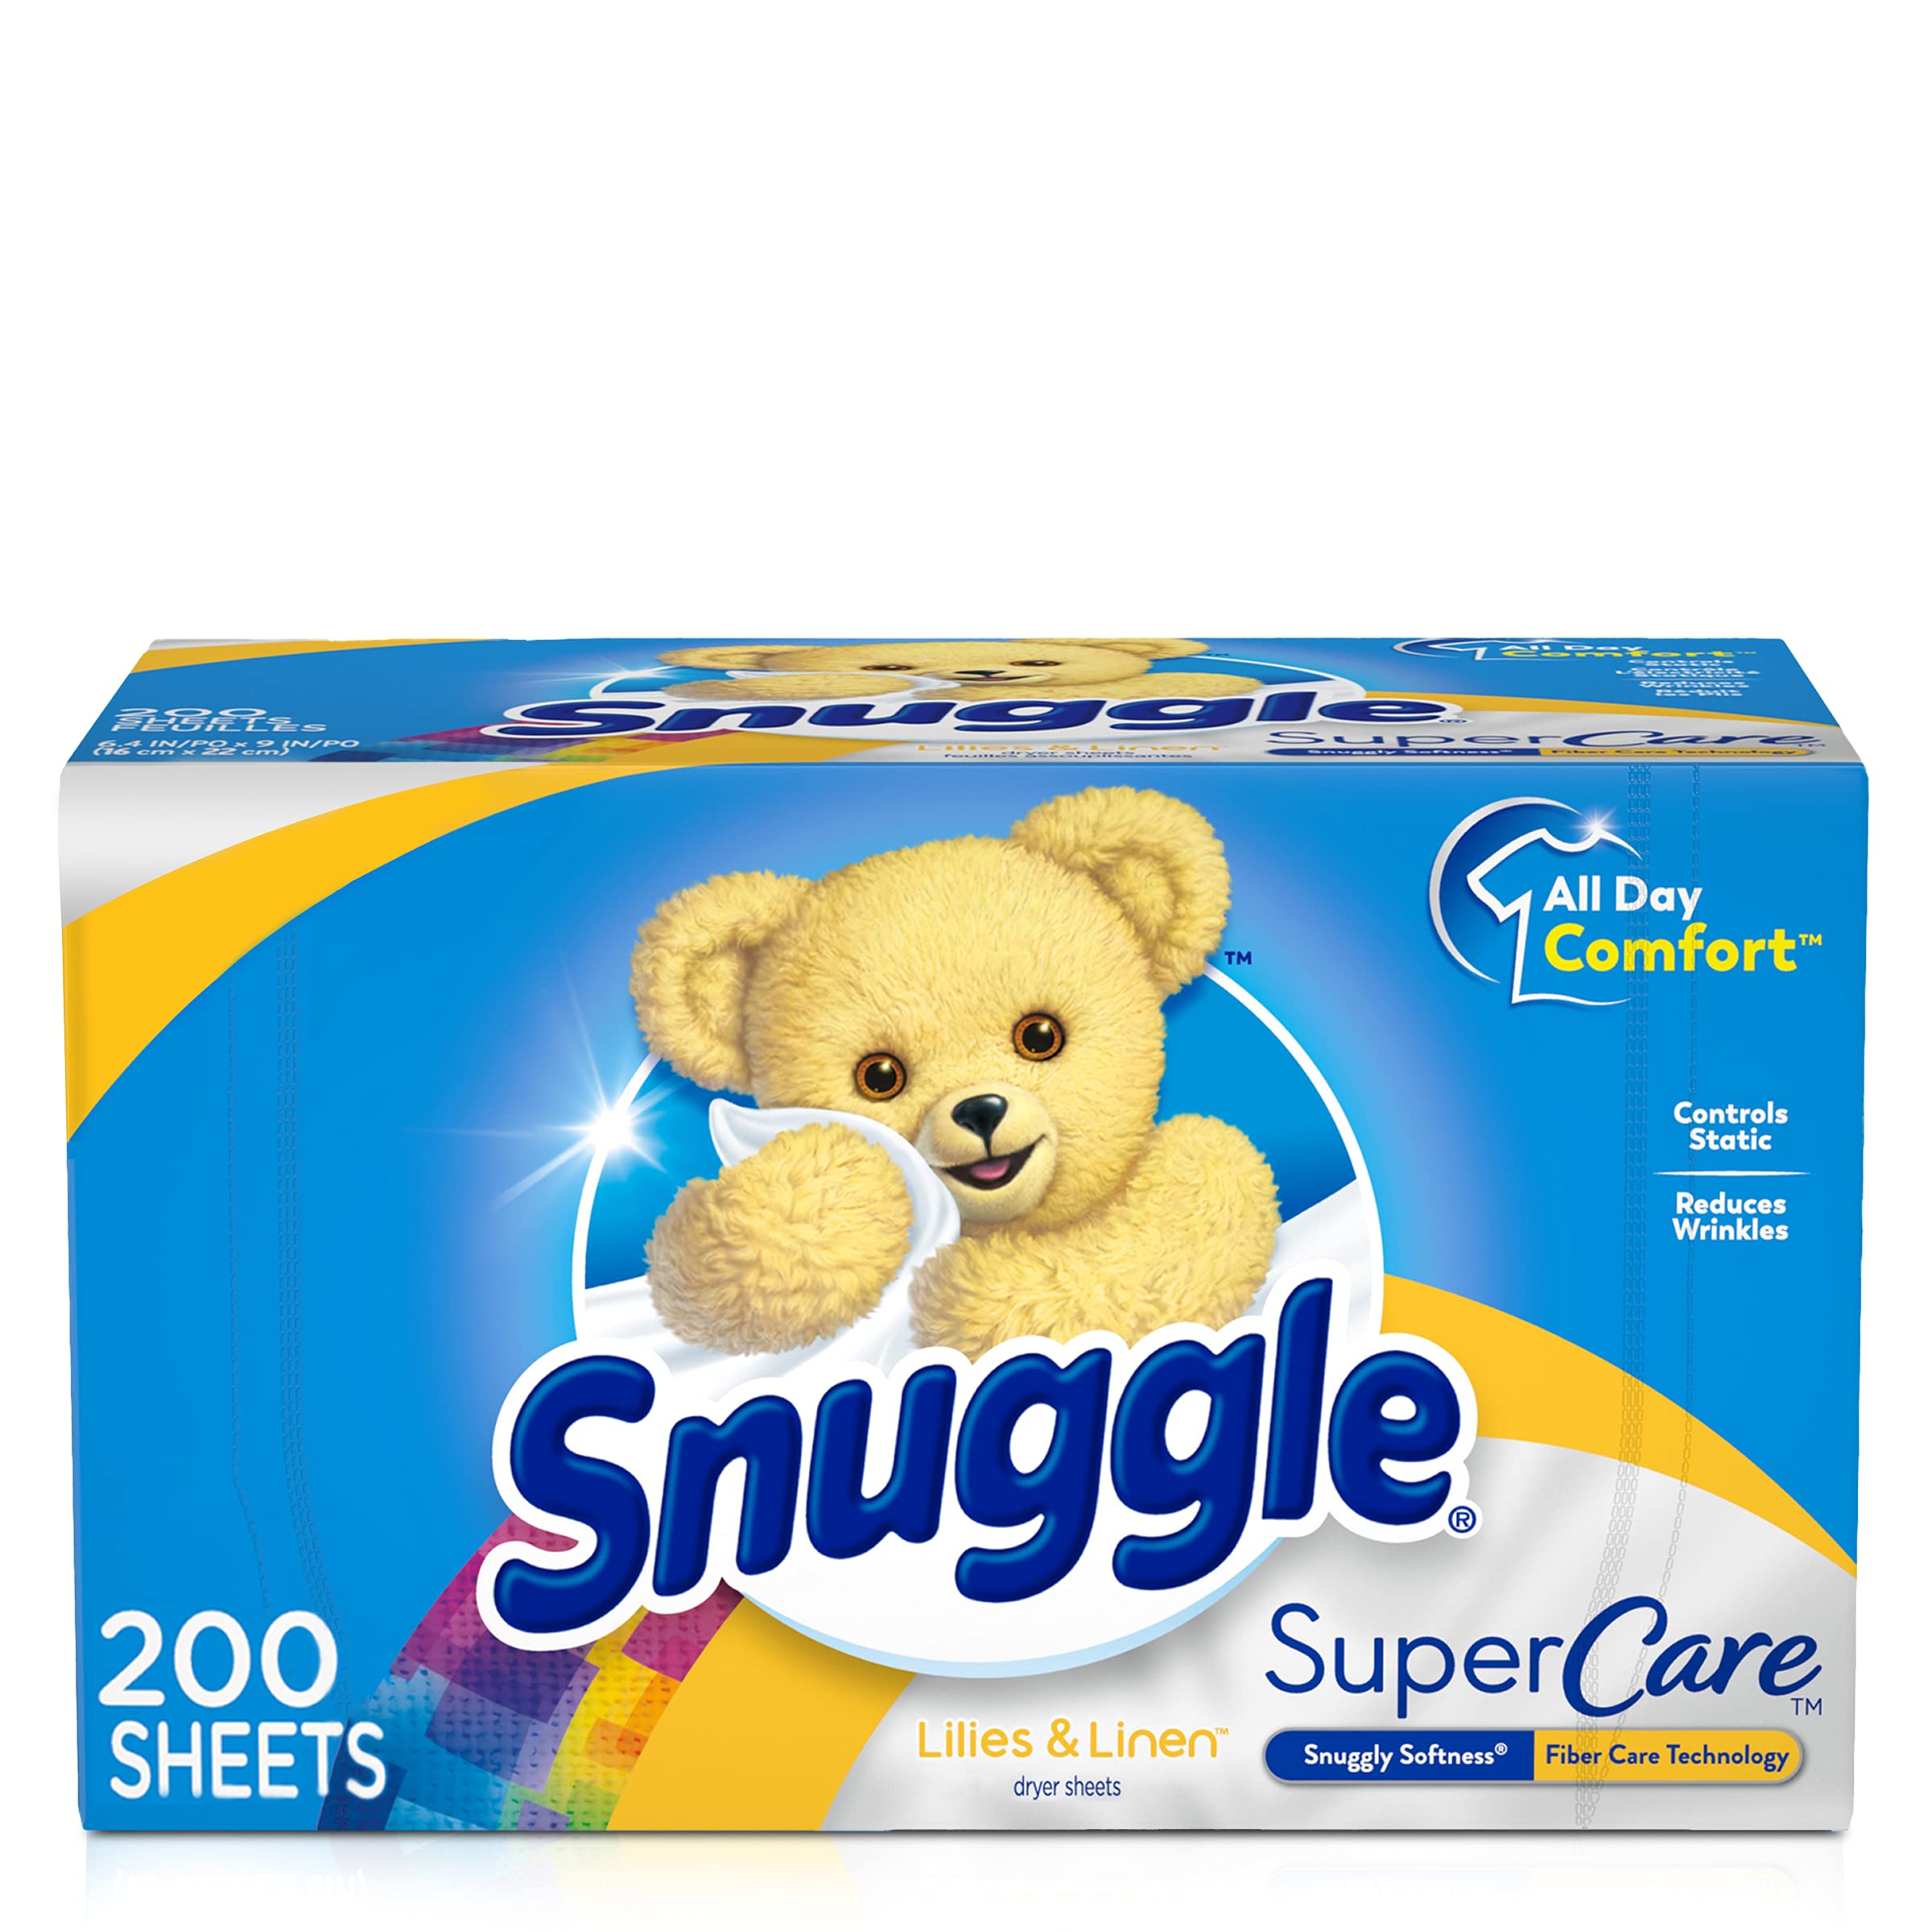 Snuggle Supercare Fabric Softener Dryer Sheets, Lilies And Linen, 200 Count